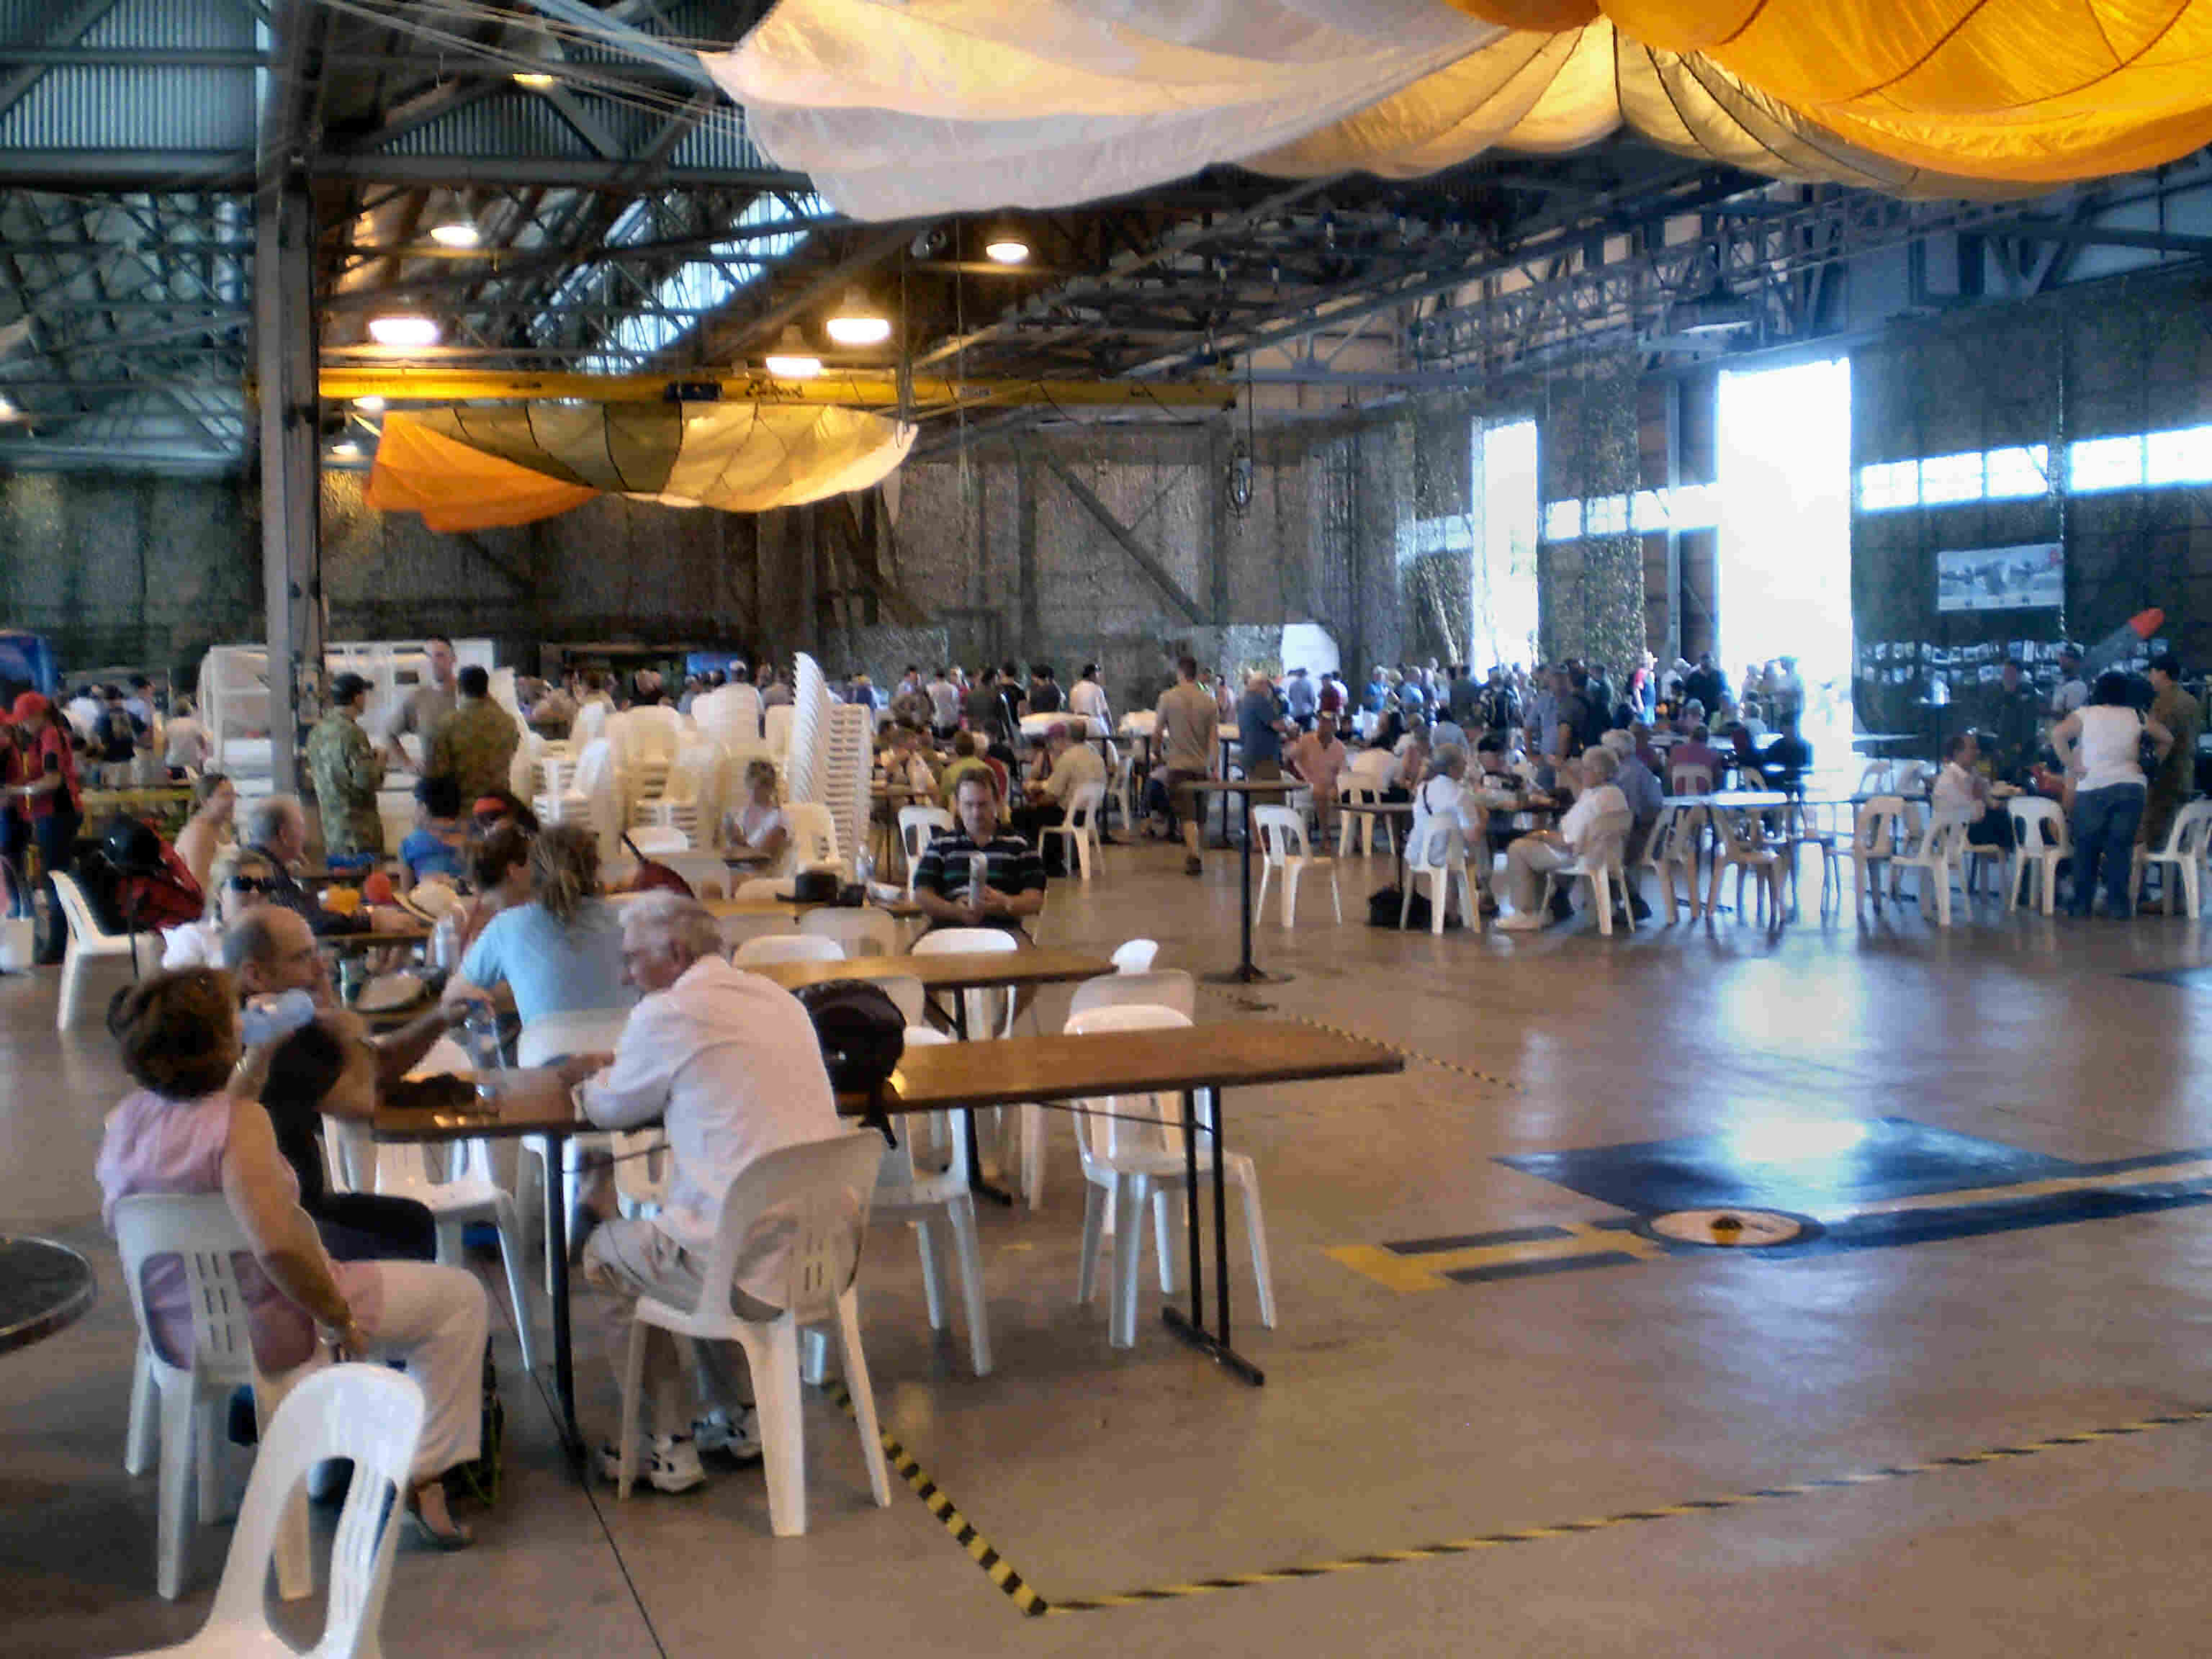 Saturday afternoon in the Hanger